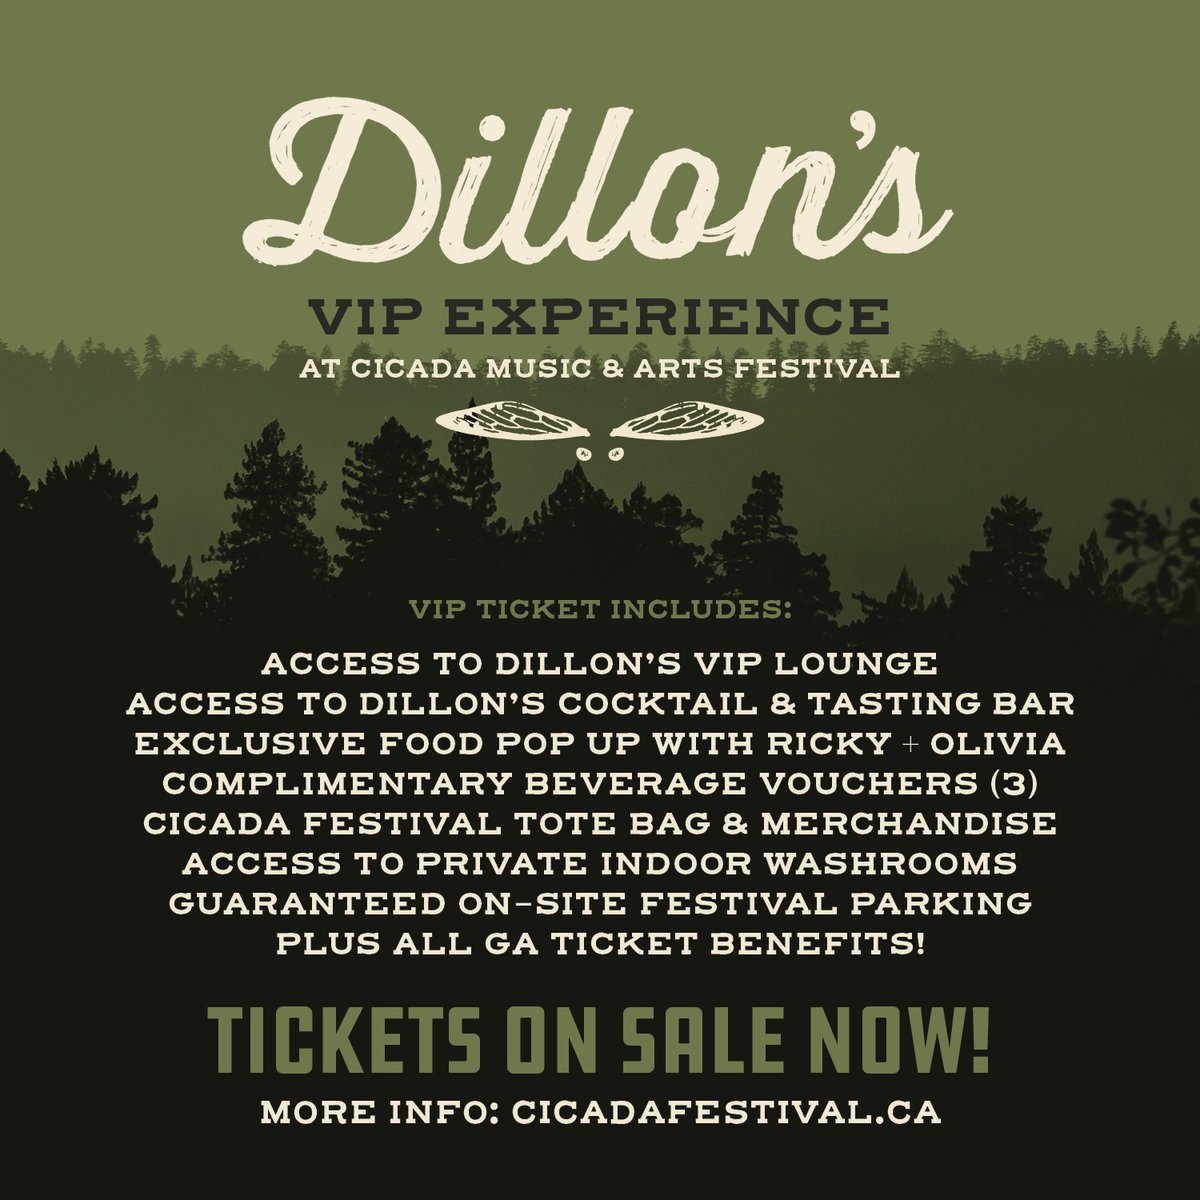 We’re proud to be teaming up with the lovely folks at @dillonsdistills this year to present the Dillon’s VIP Experience! 🍹🦪✨ Featuring an exclusive food pop up from Ricky + Olivia, limited festival merchandise & more. Tickets: bit.ly/3aZq3pm